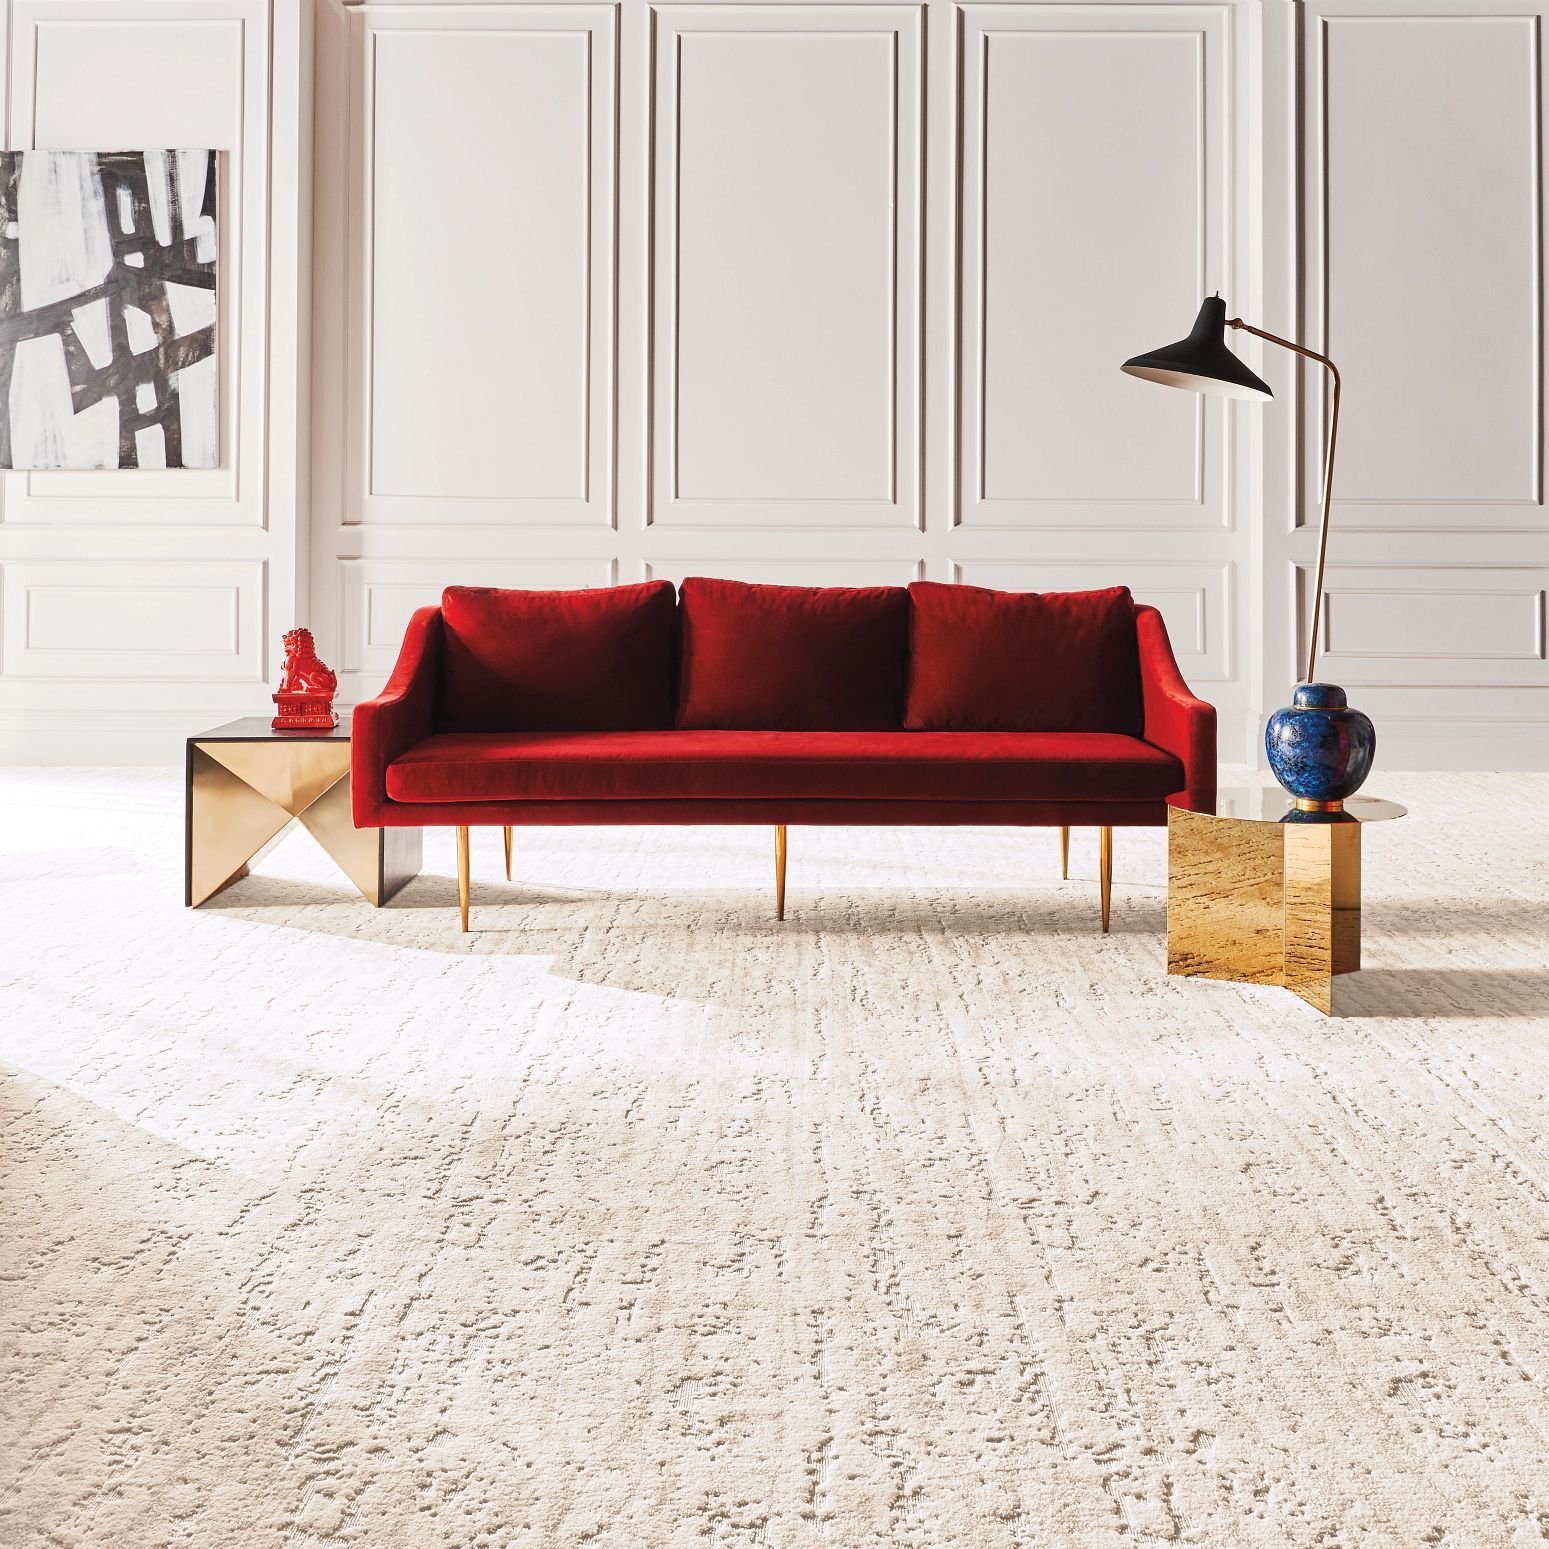 Red couch on carpet - Diamond Floor Covering in Monroe